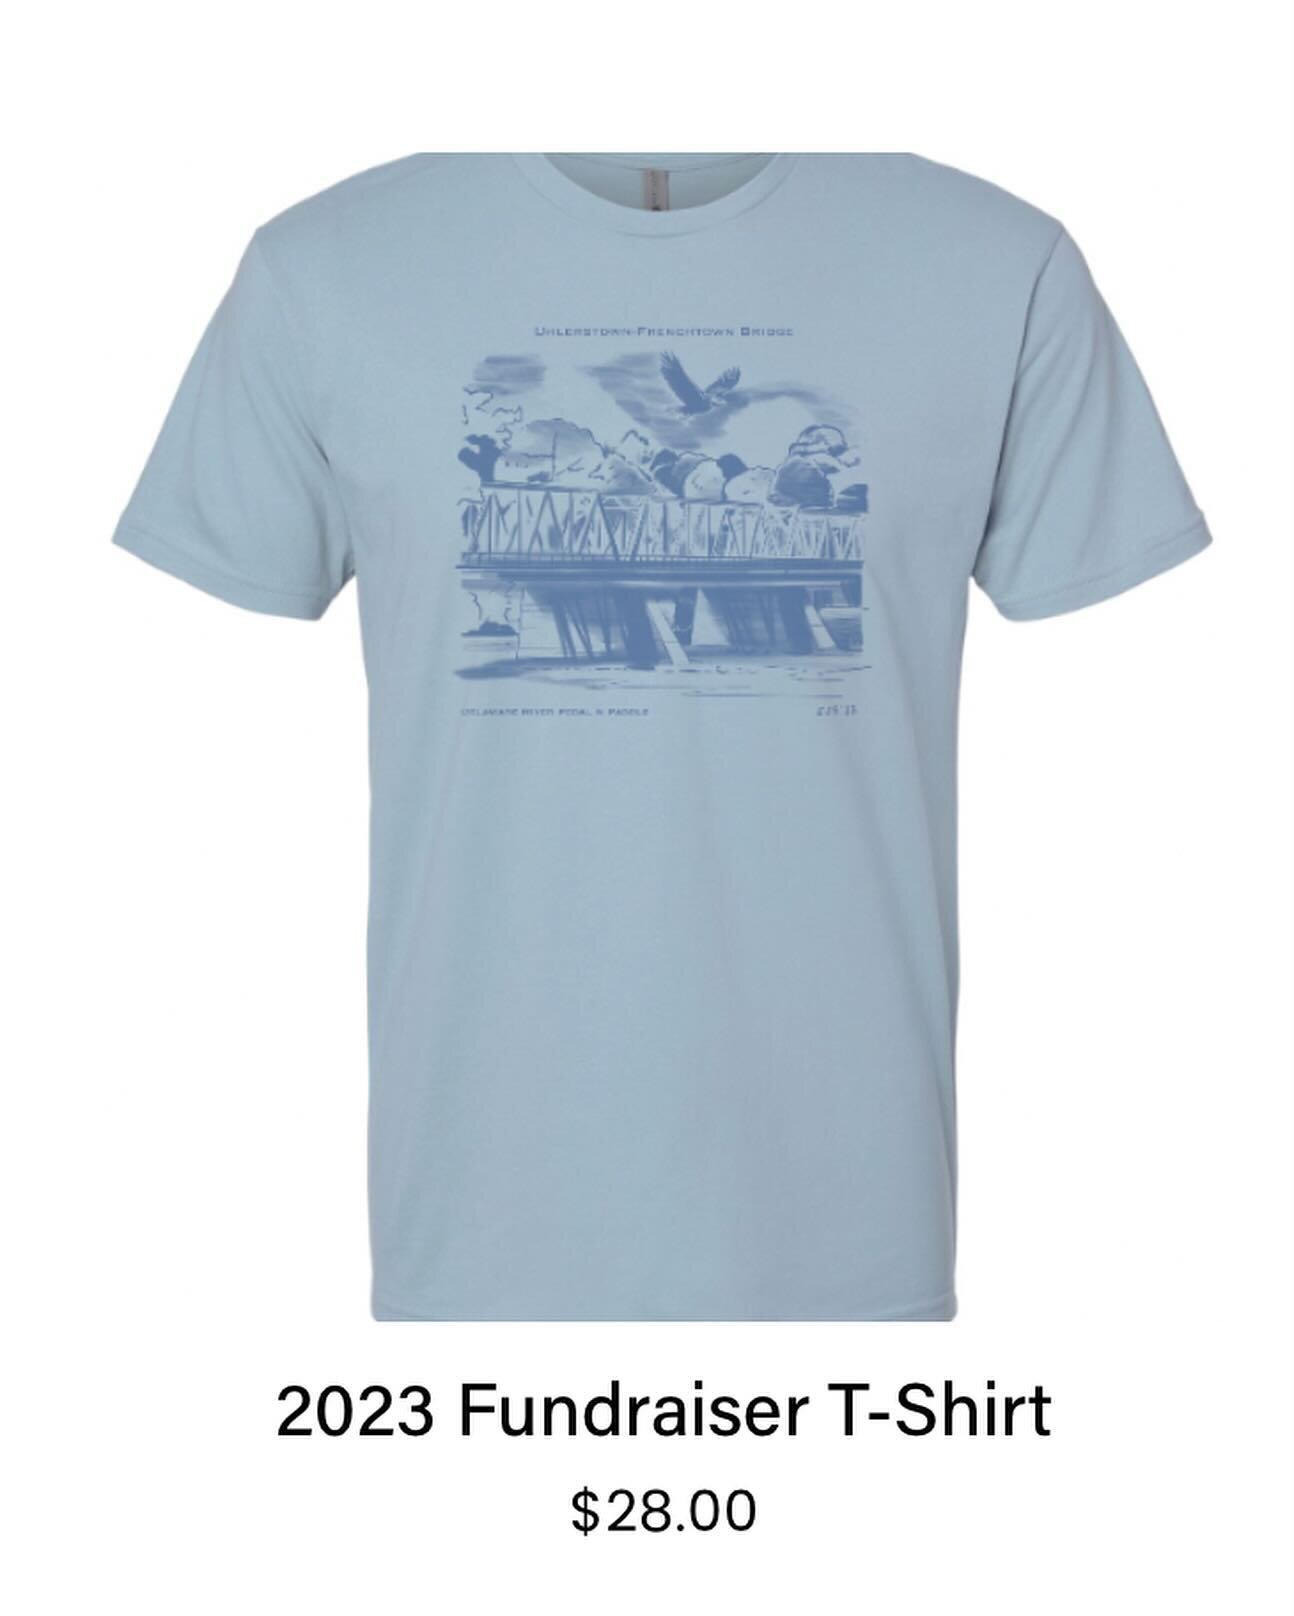 We still have 2023 Fundraiser T-Shirts! Help us support the Friends of the Delaware Canal (@friendsofthedelawarecanal) and the Delaware River Greenway Partnership (@delrivergreenway). We will be doing new artwork each year designed by local artists. 